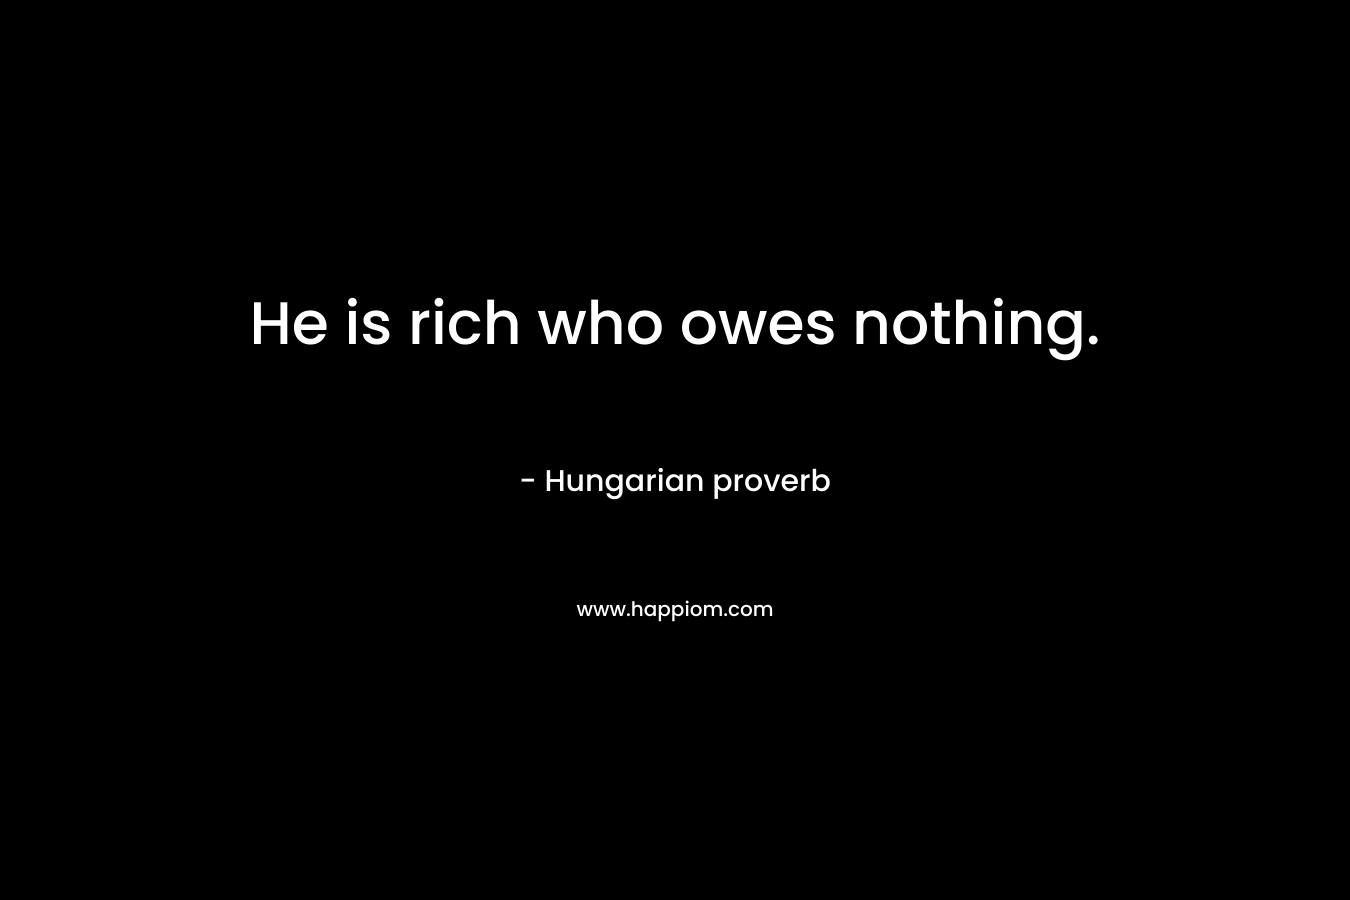 He is rich who owes nothing.